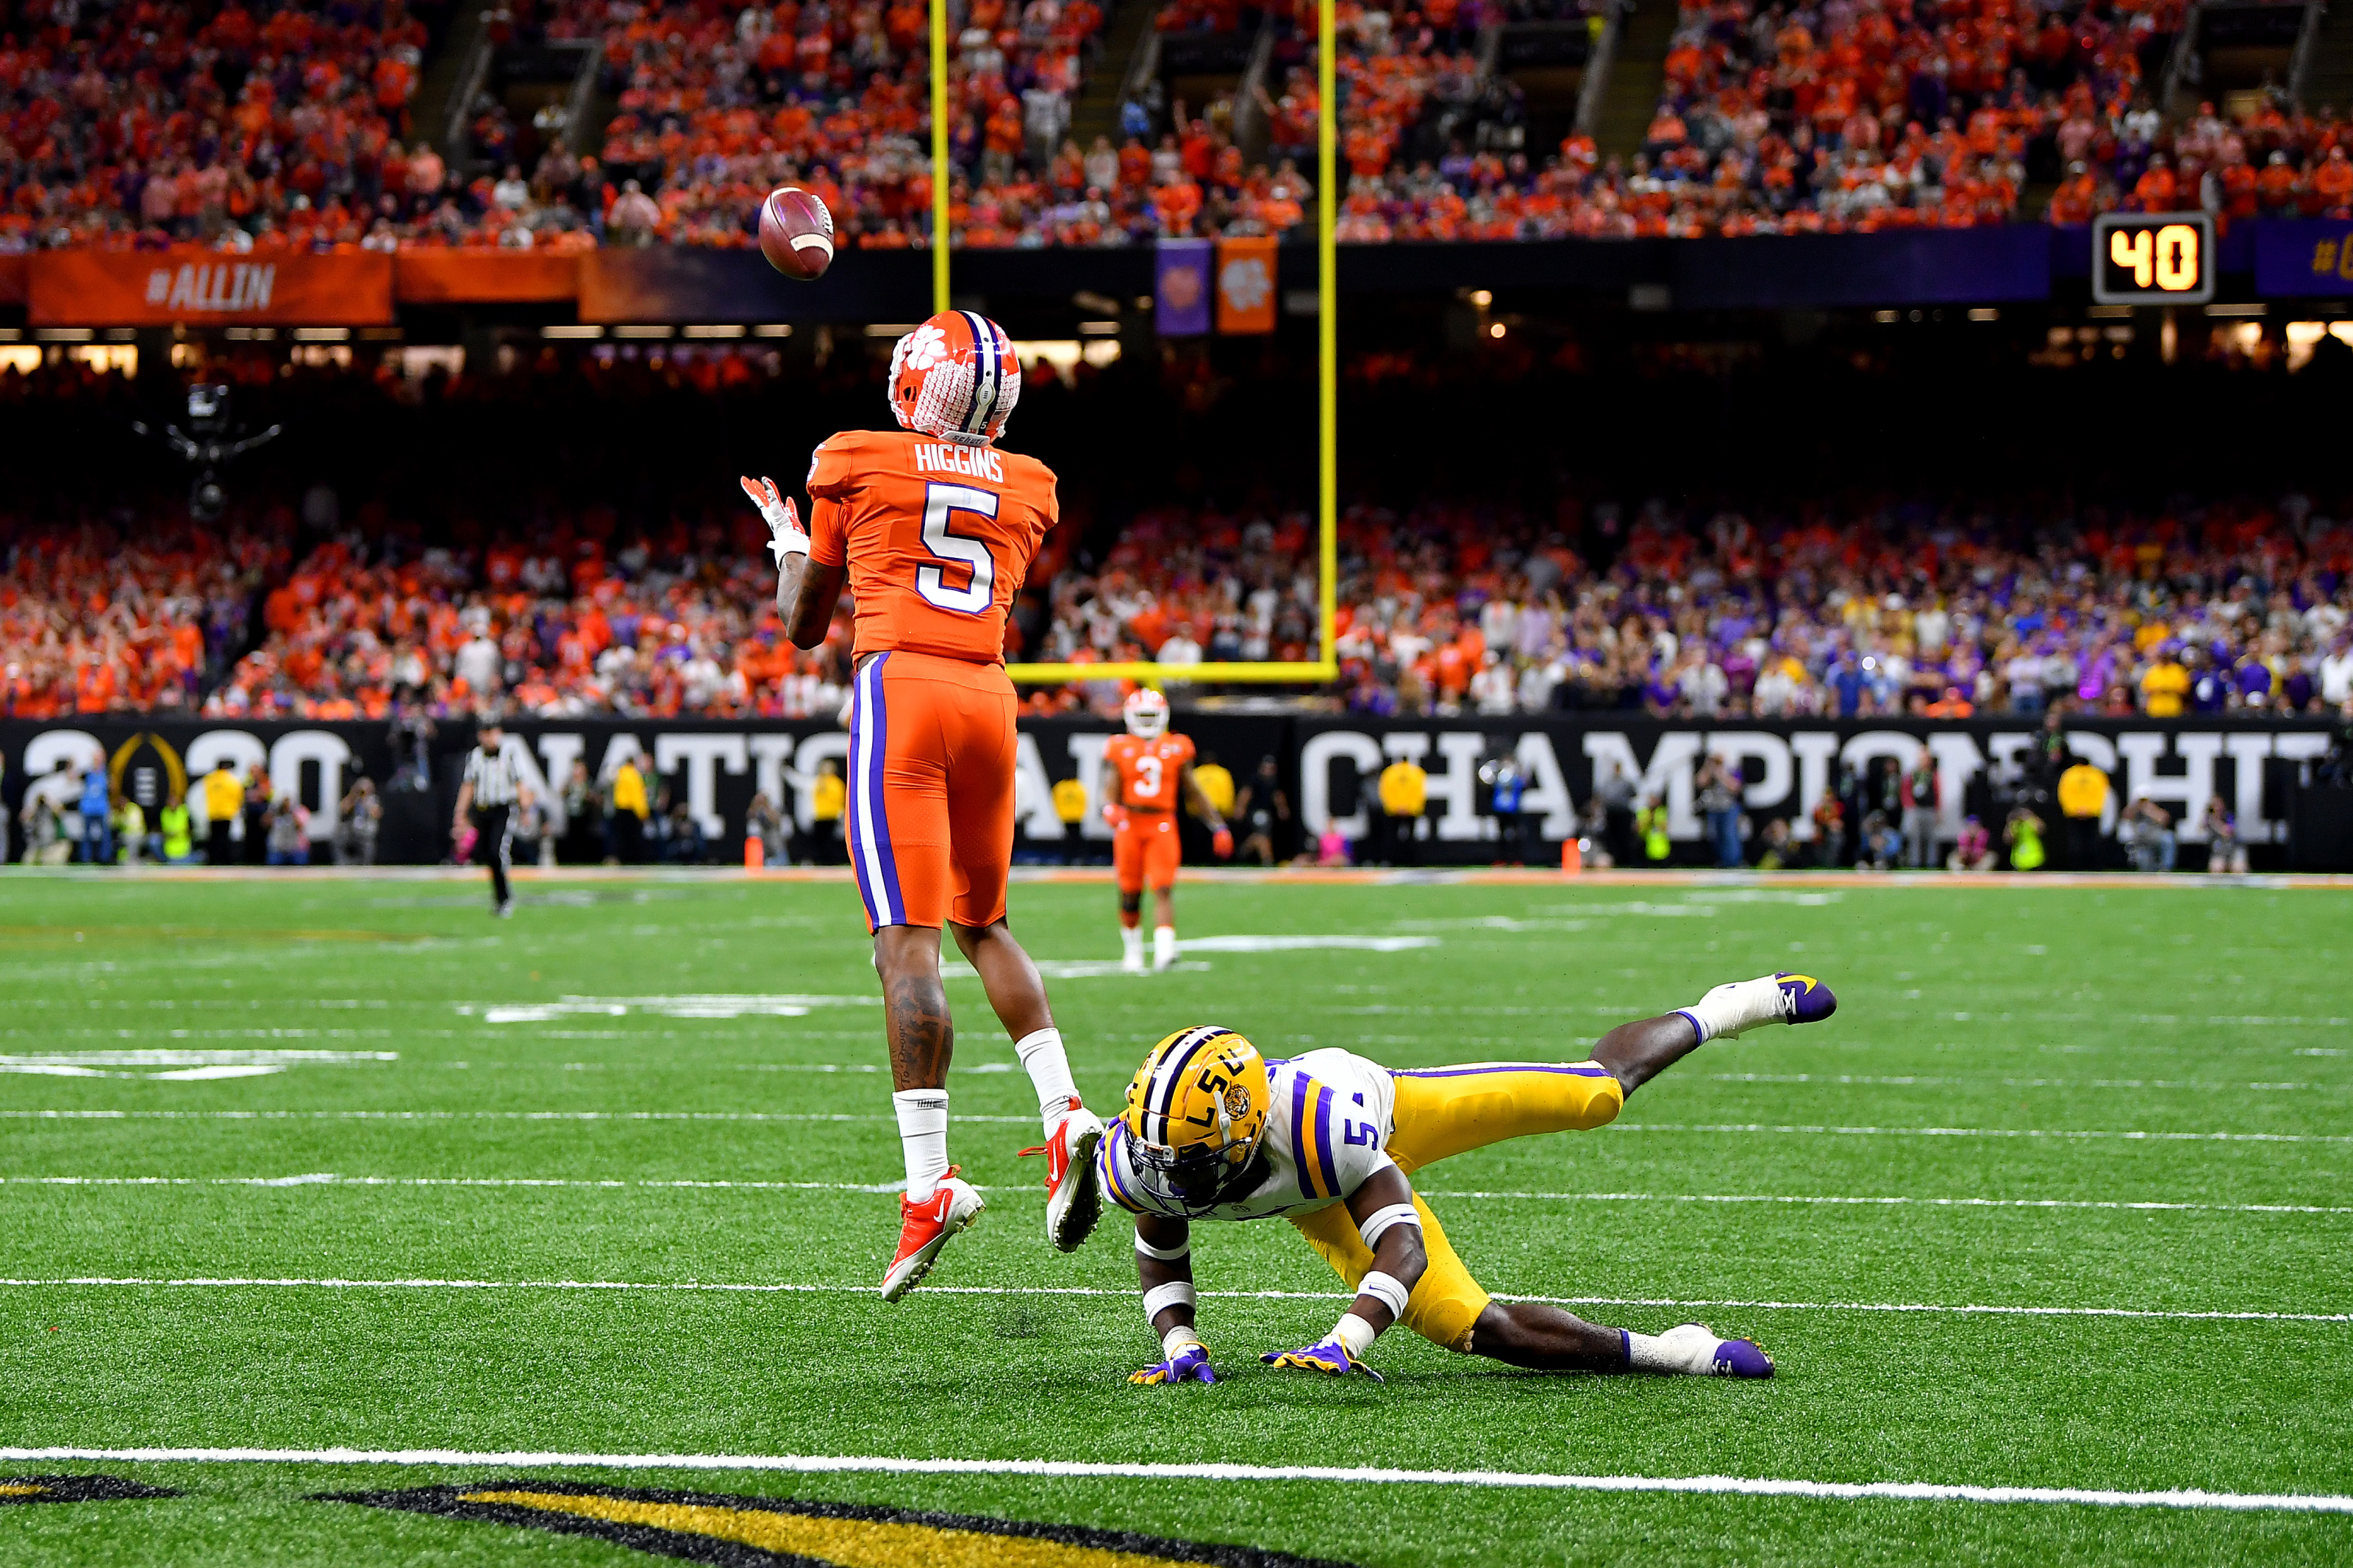 Higgins gives his top 3 wide receivers all-time from Clemson